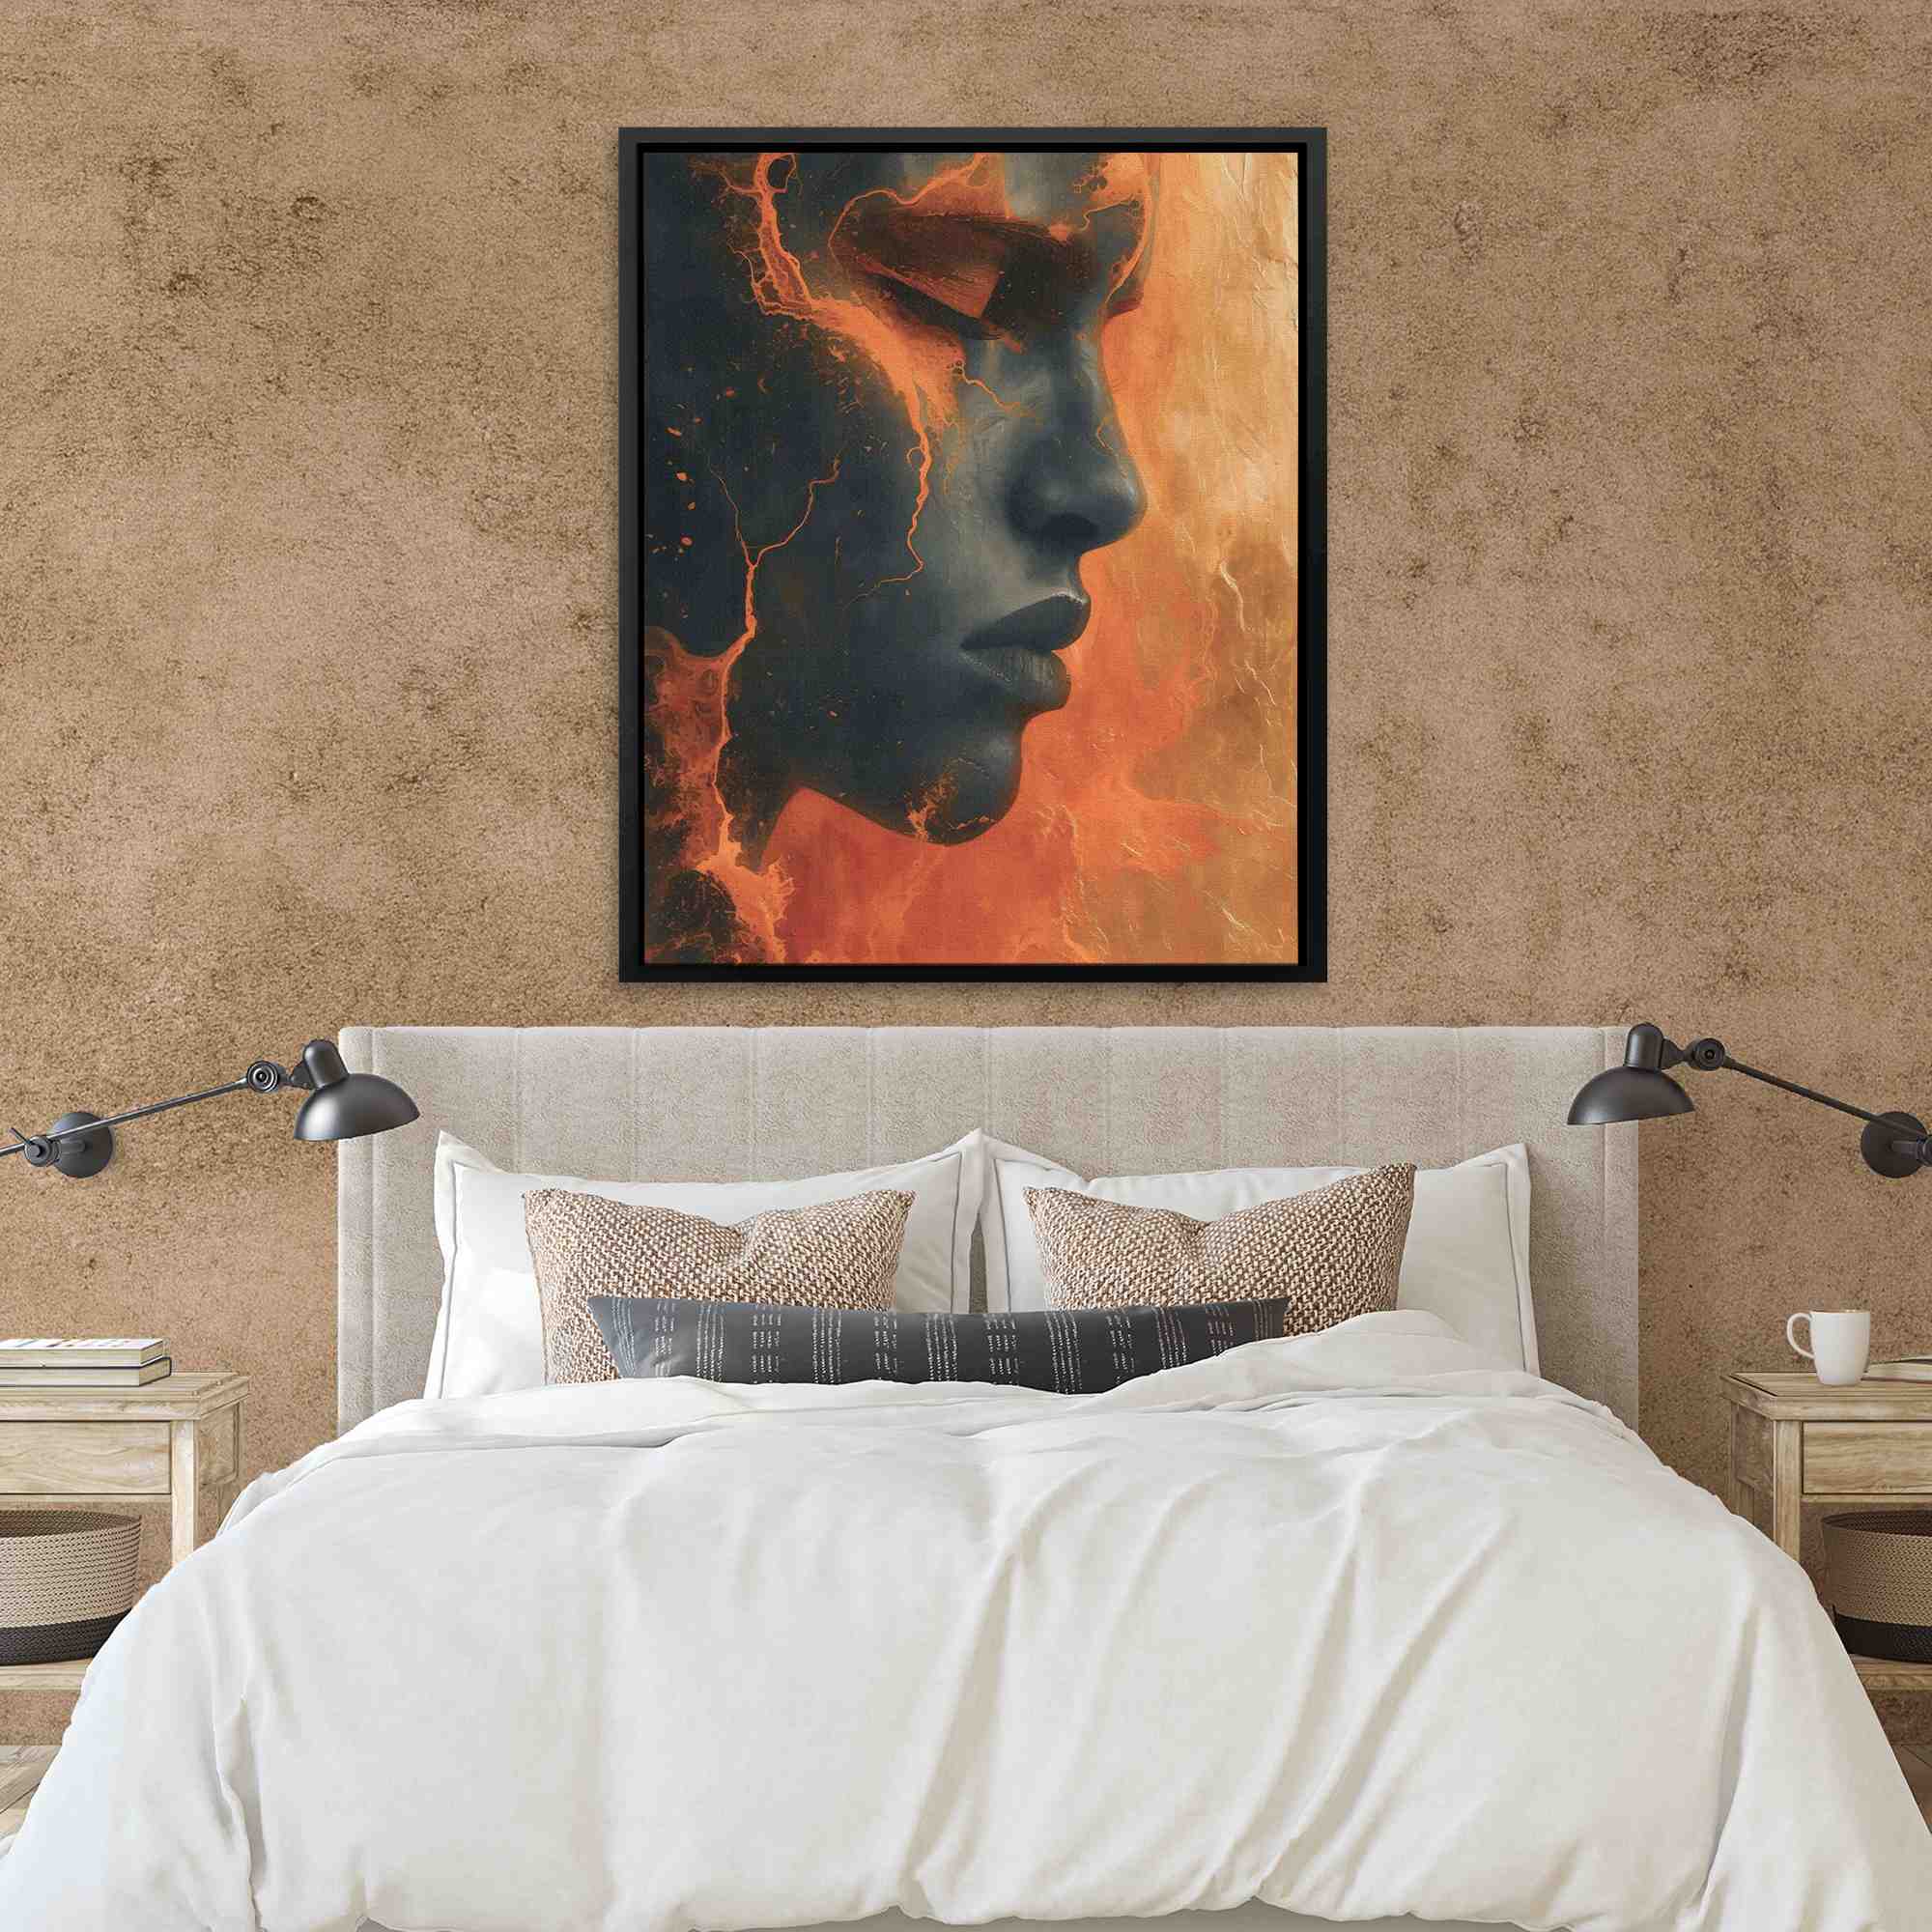 a painting of a woman's face on fire